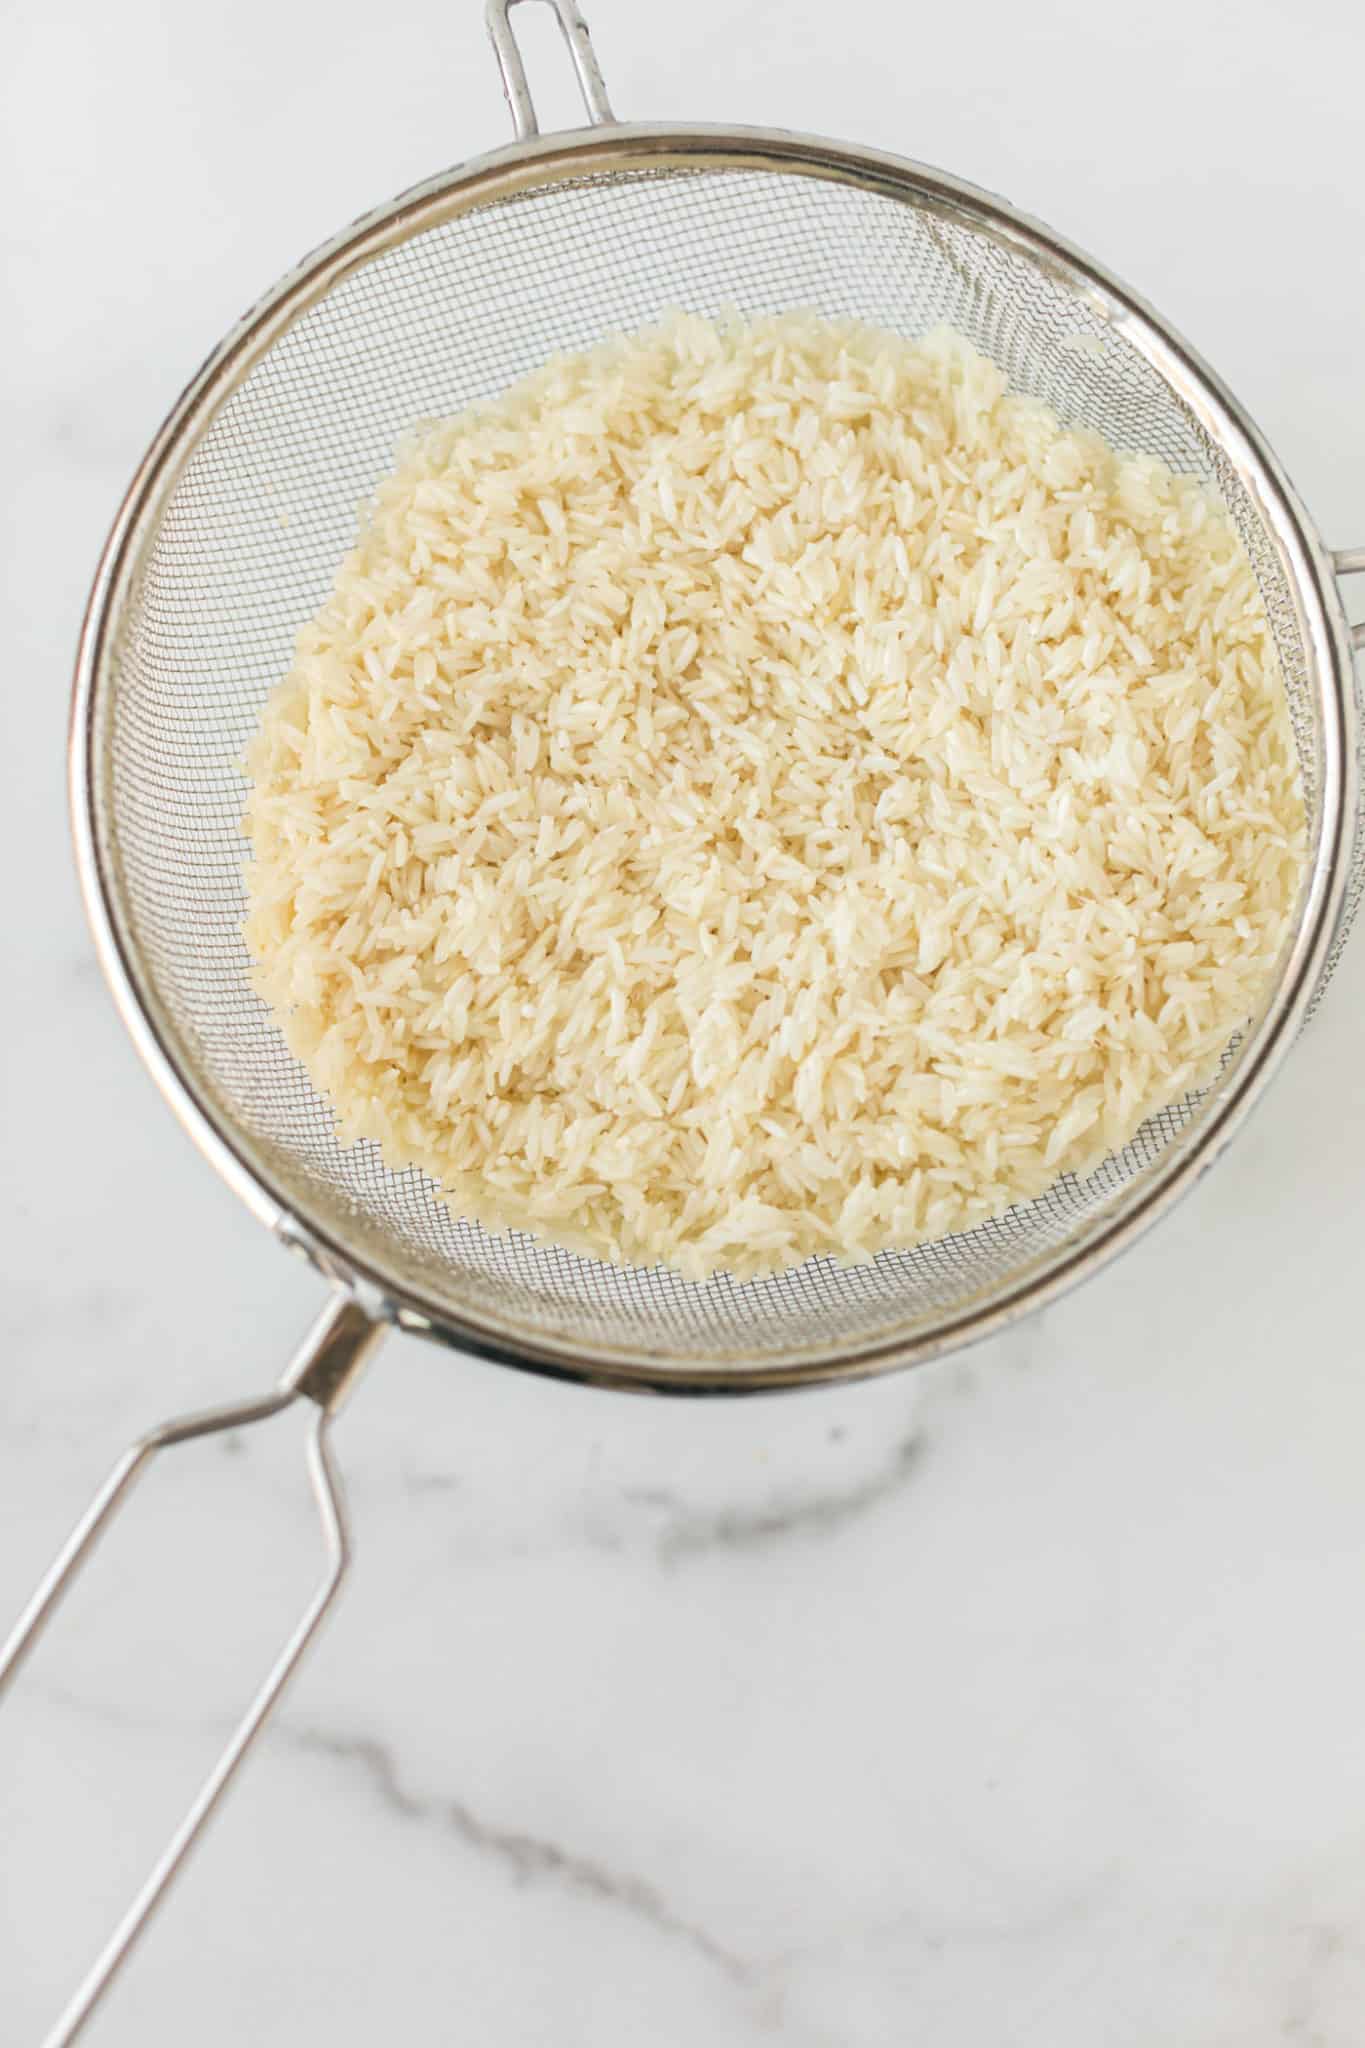 white rice in a strainer.